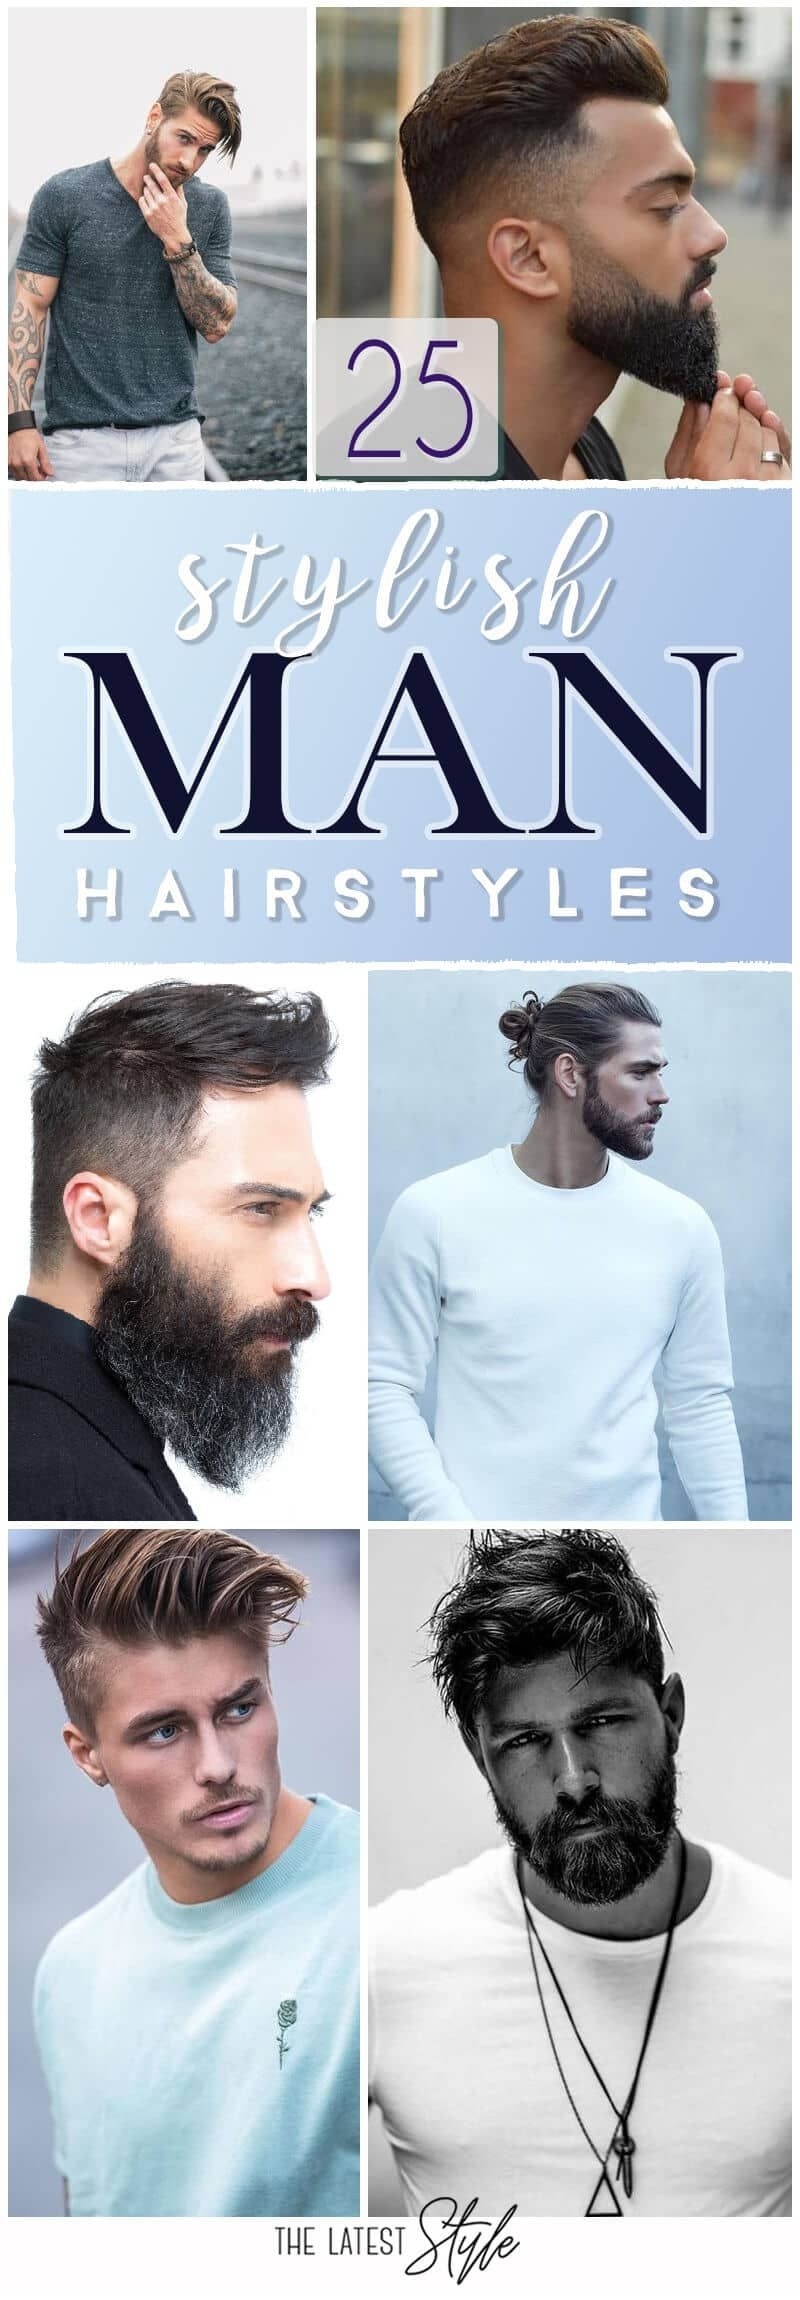 25 Stylish Man Hairstyle Ideas That You Must Try #hairstyle within Hairstyles For Me Try On